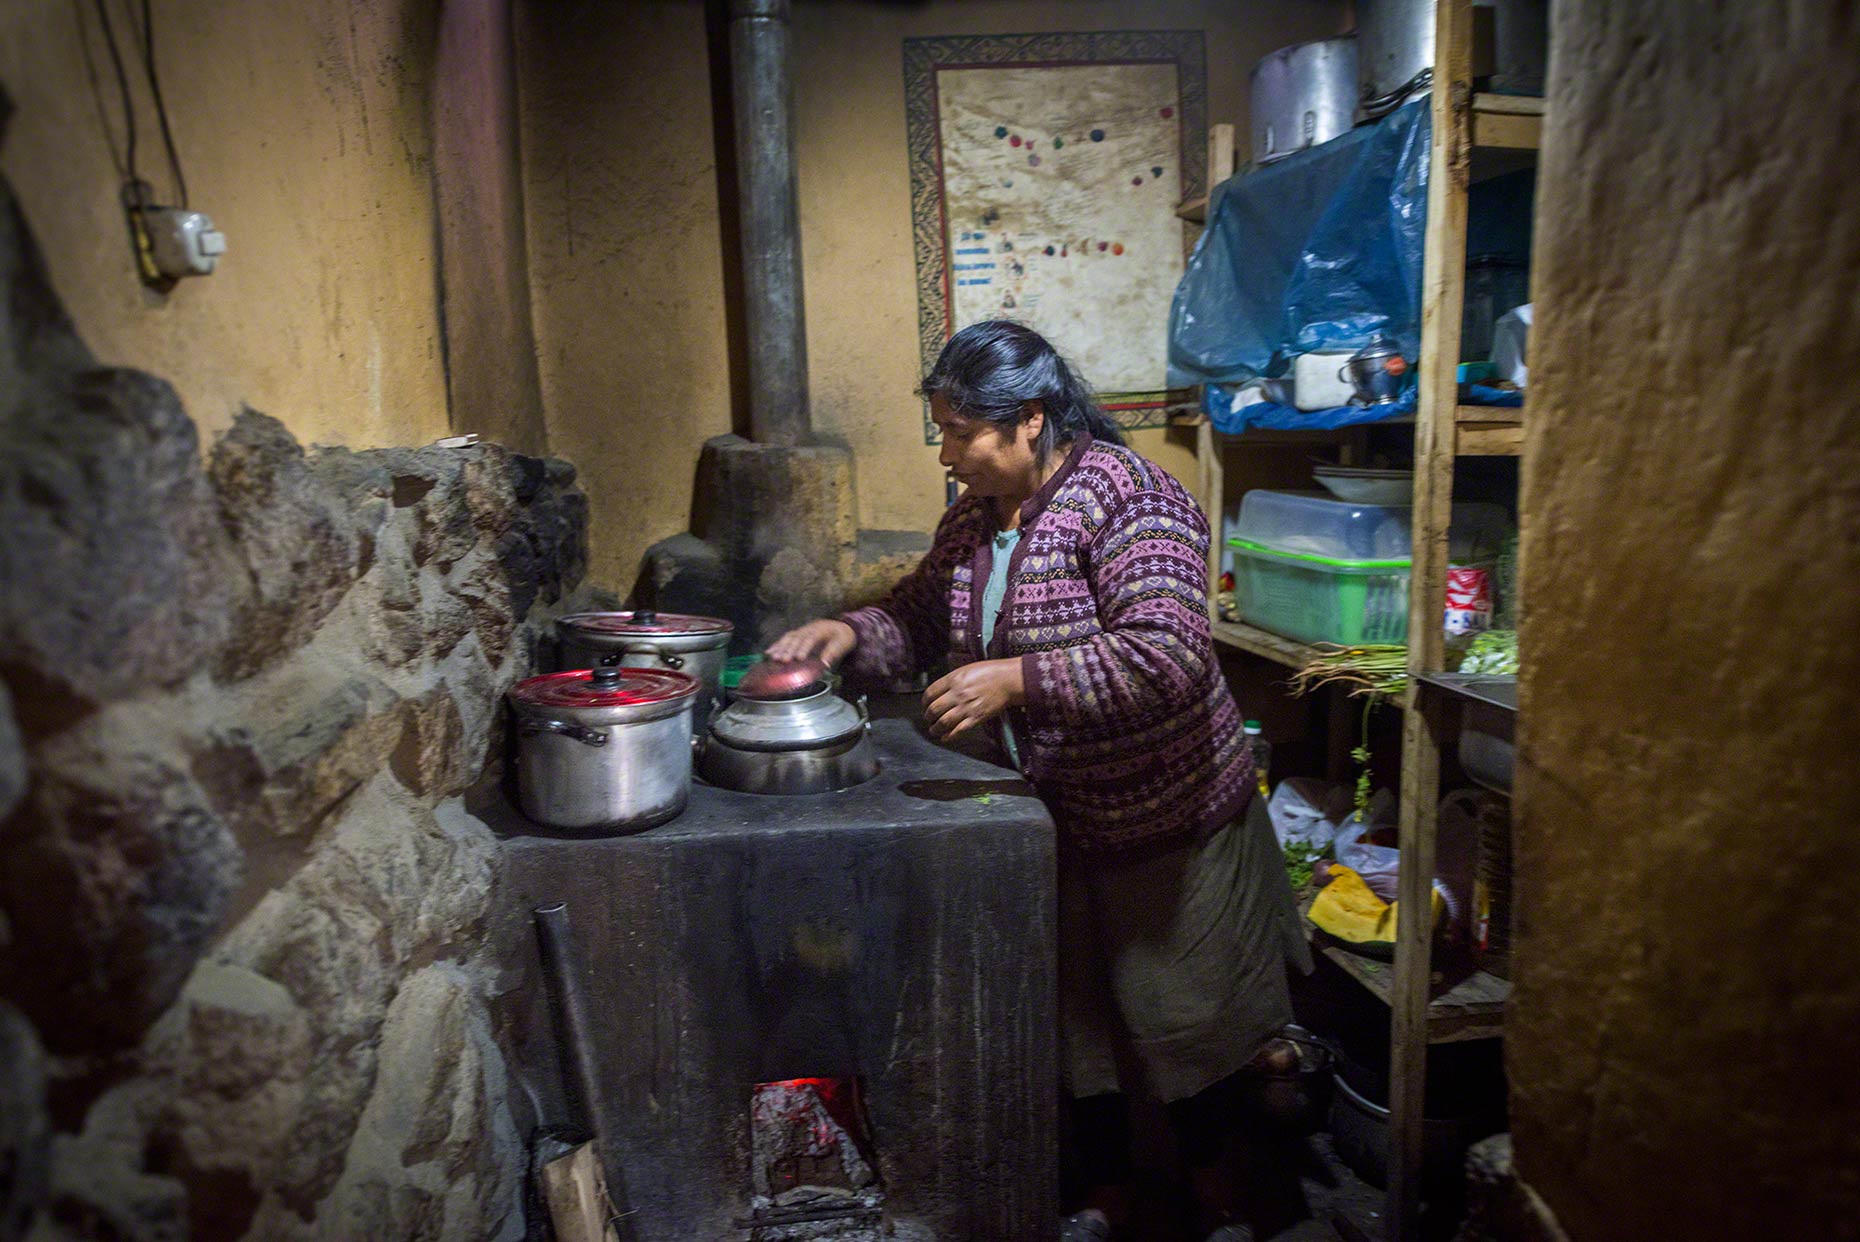  El Comedor
Jose Antonio’s mother cooking potatoes in the family’s small kitchen. Potatoes are often all that is available to the family.
